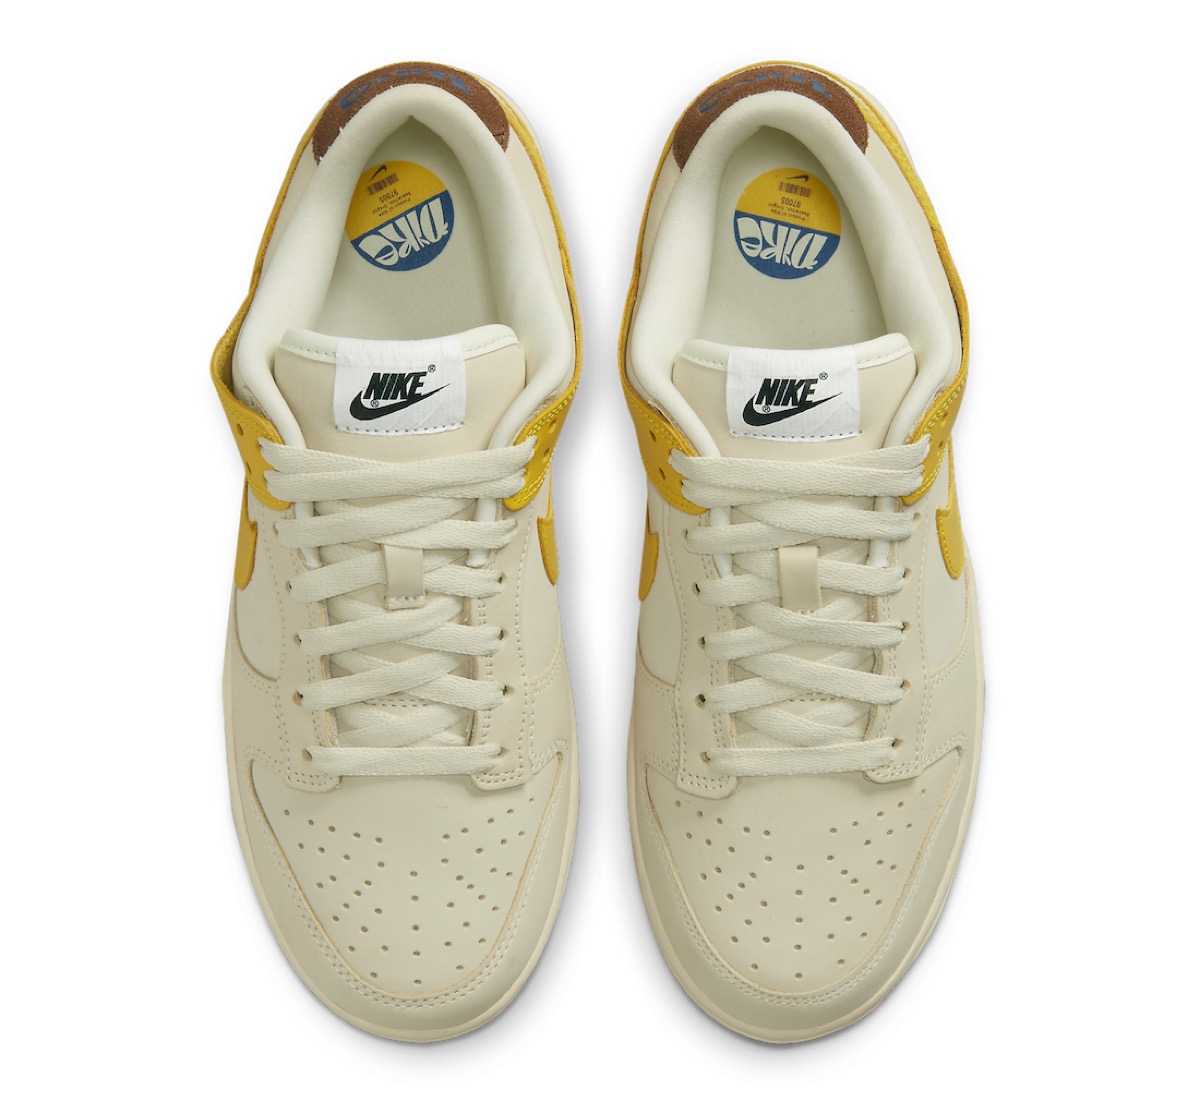 Nike Wmns Dunk Low LX “Banana”が国内5月28日に発売予定 | UP TO DATE